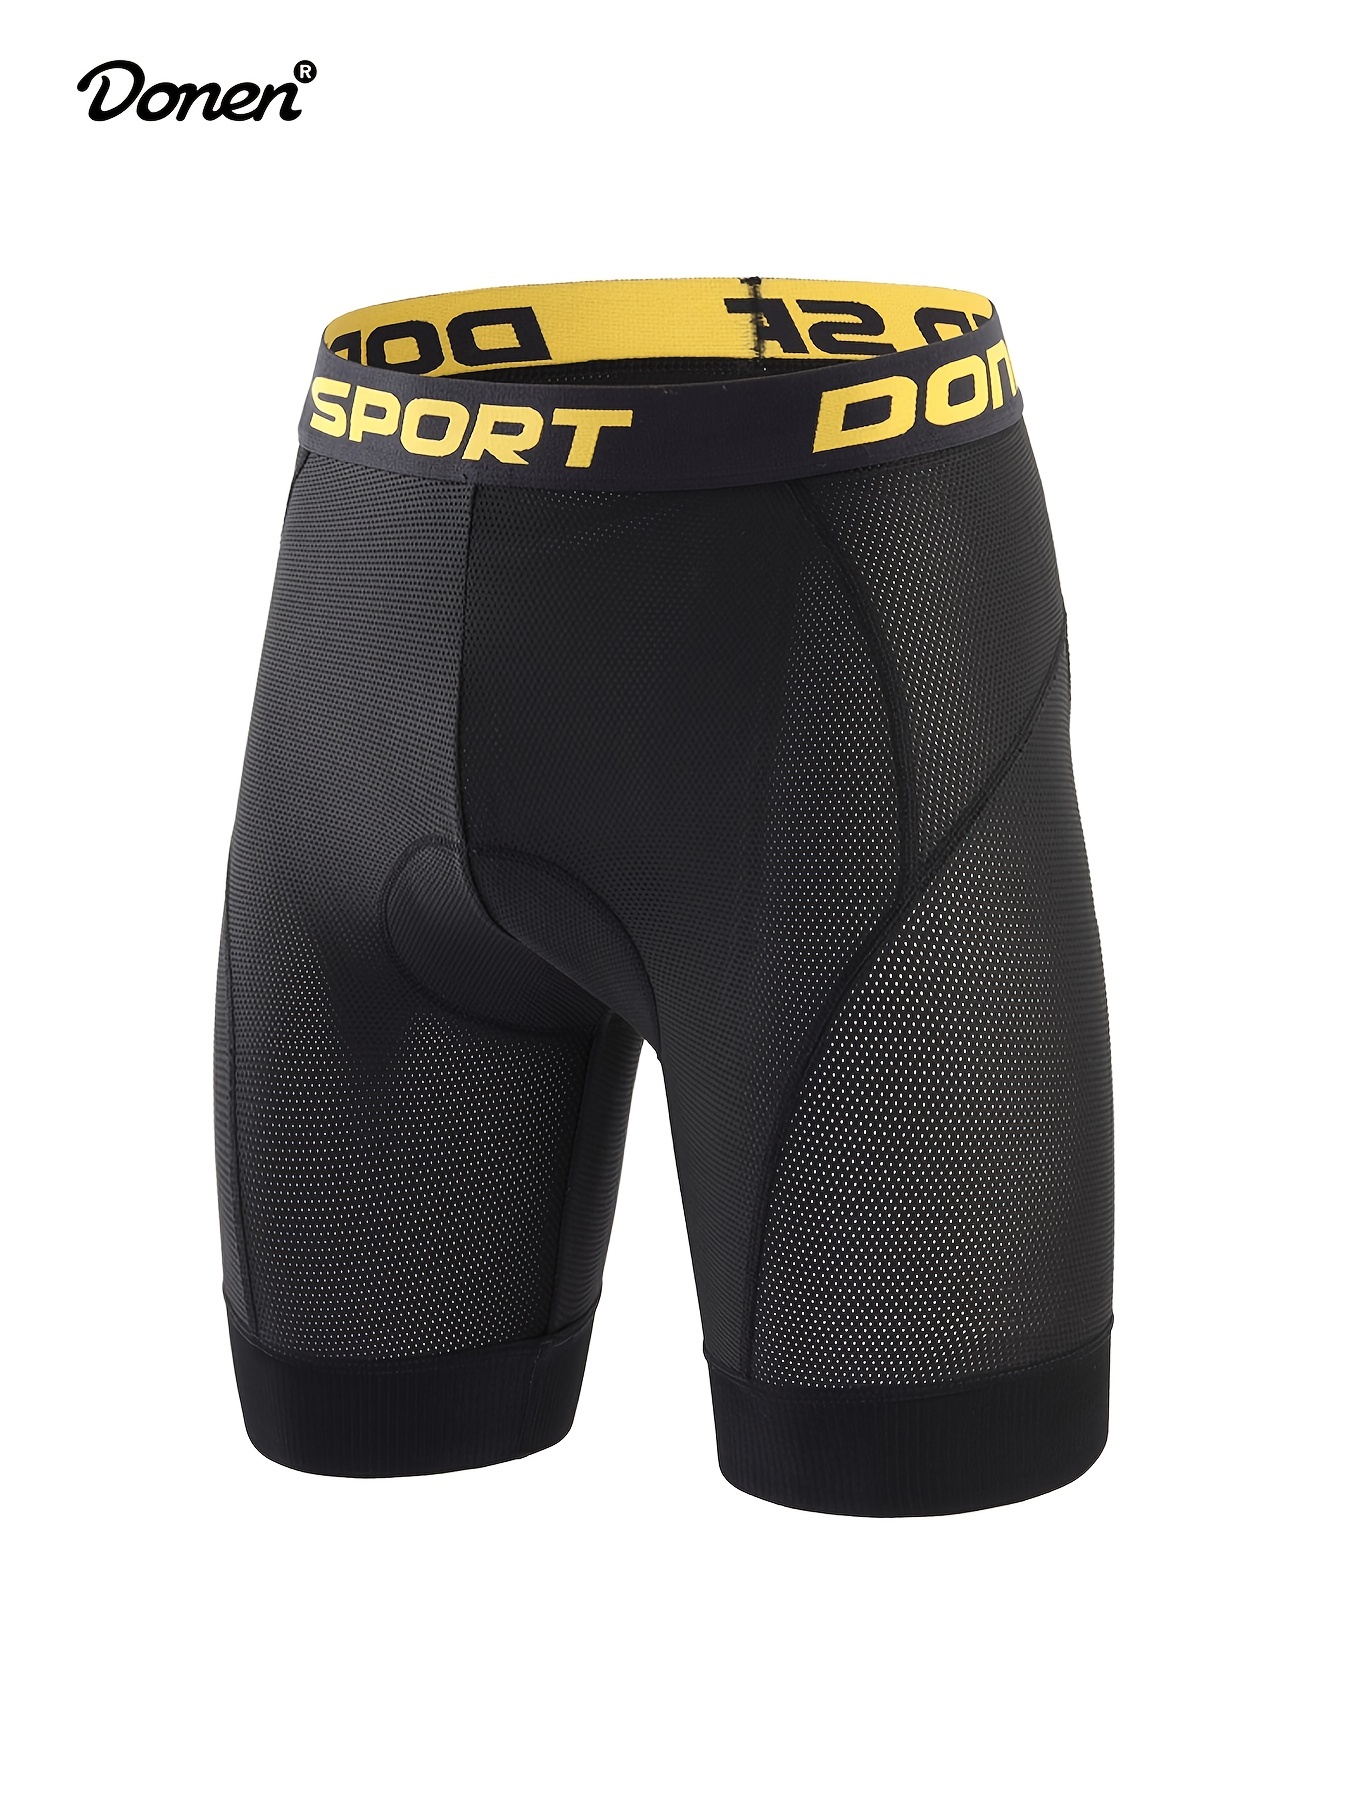 Cycling shorts One Leg Compression Men's Tights Cycling Clothing Sports  Tights Athletic Base Layer Underwear MTB Bicycle Pants